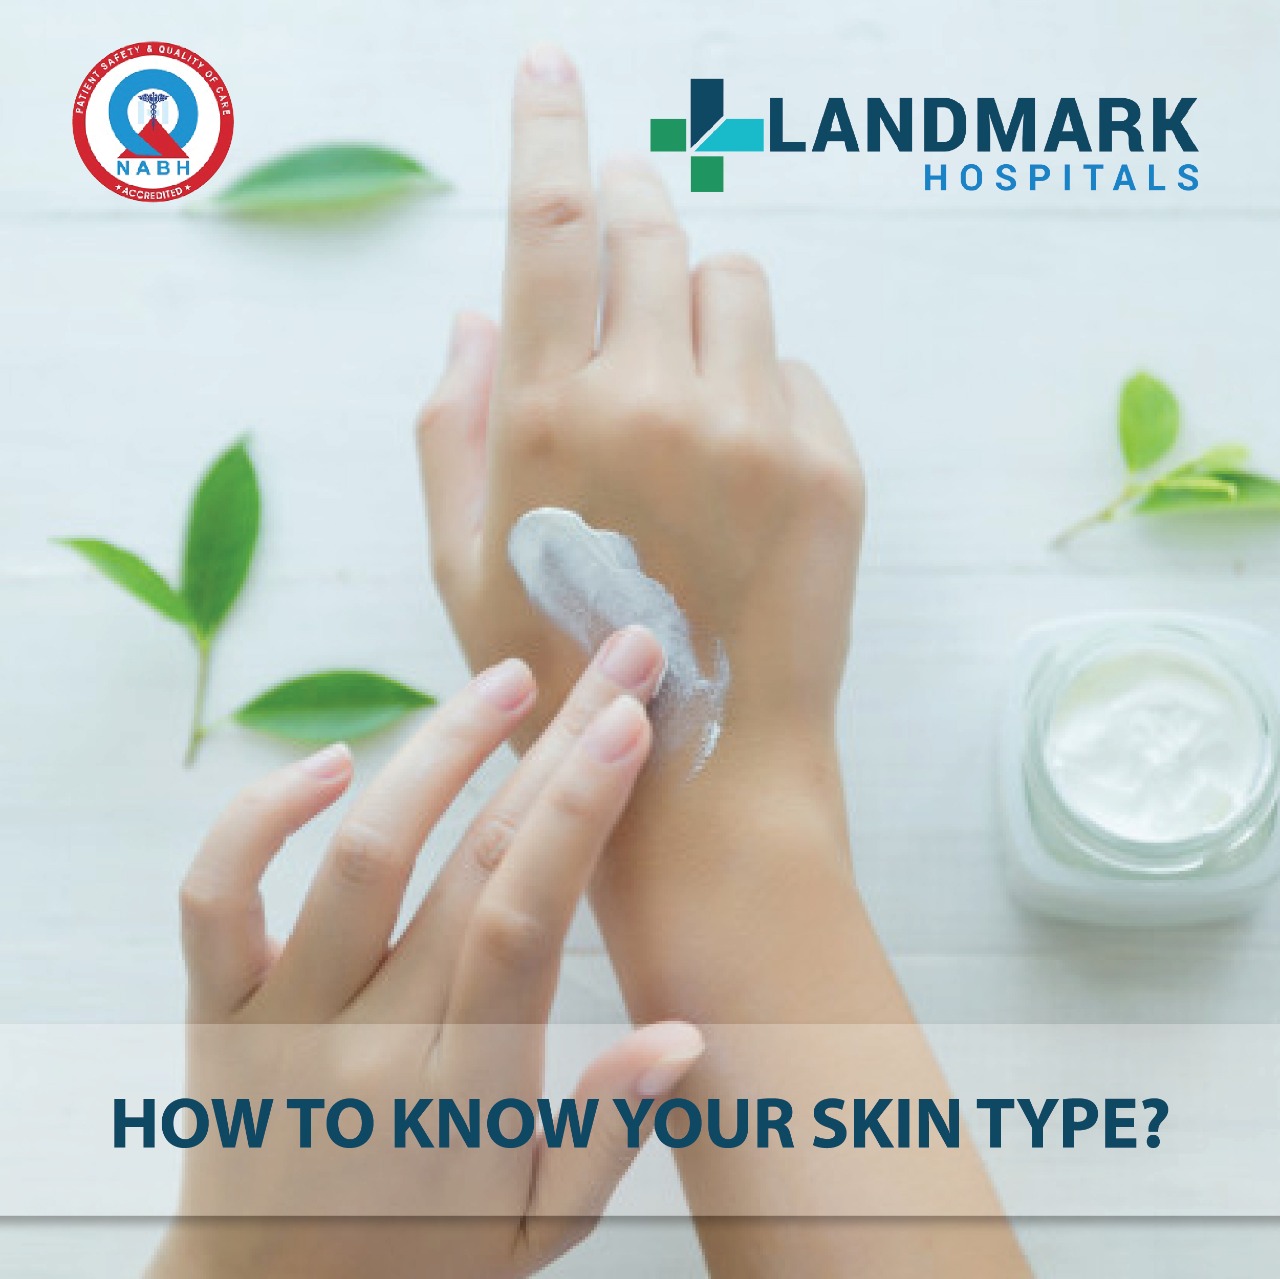 How to Know Your Skin Type?